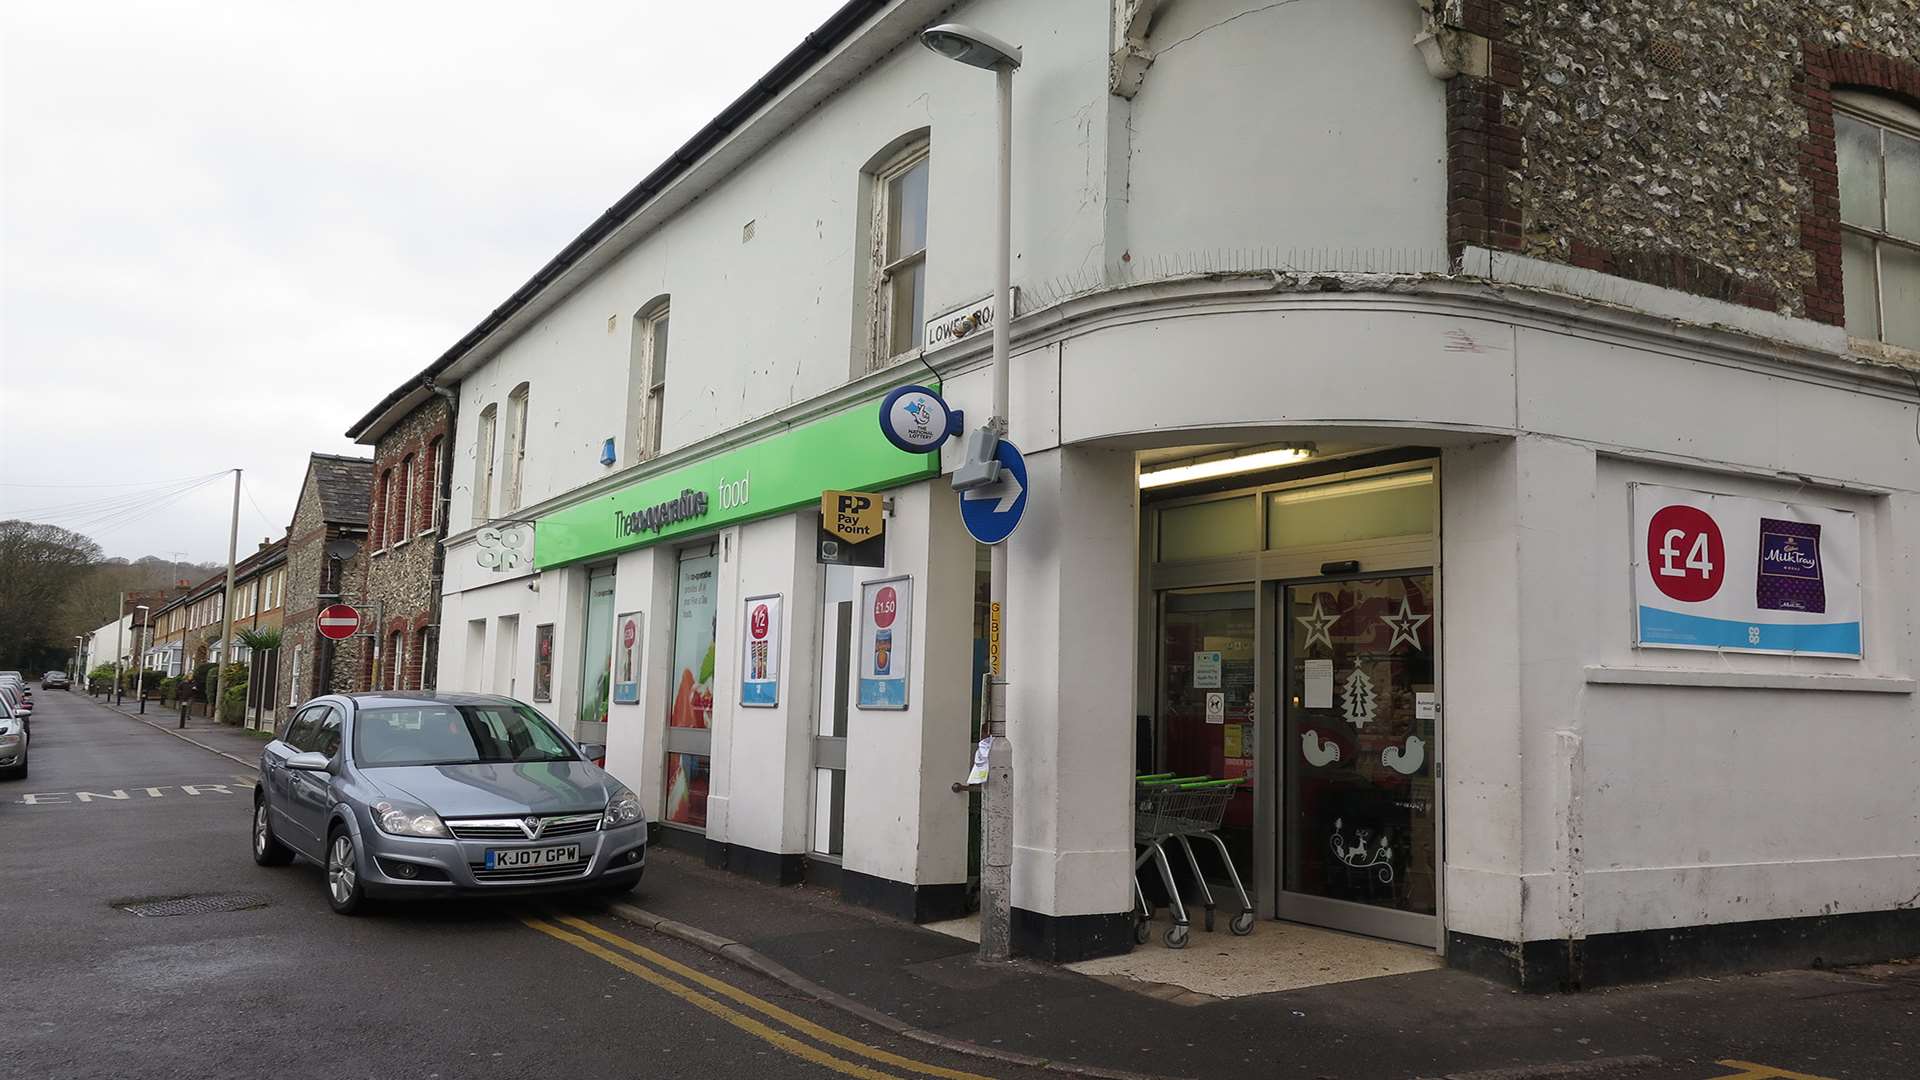 The Co-op in Lower Road, River was targeted last night